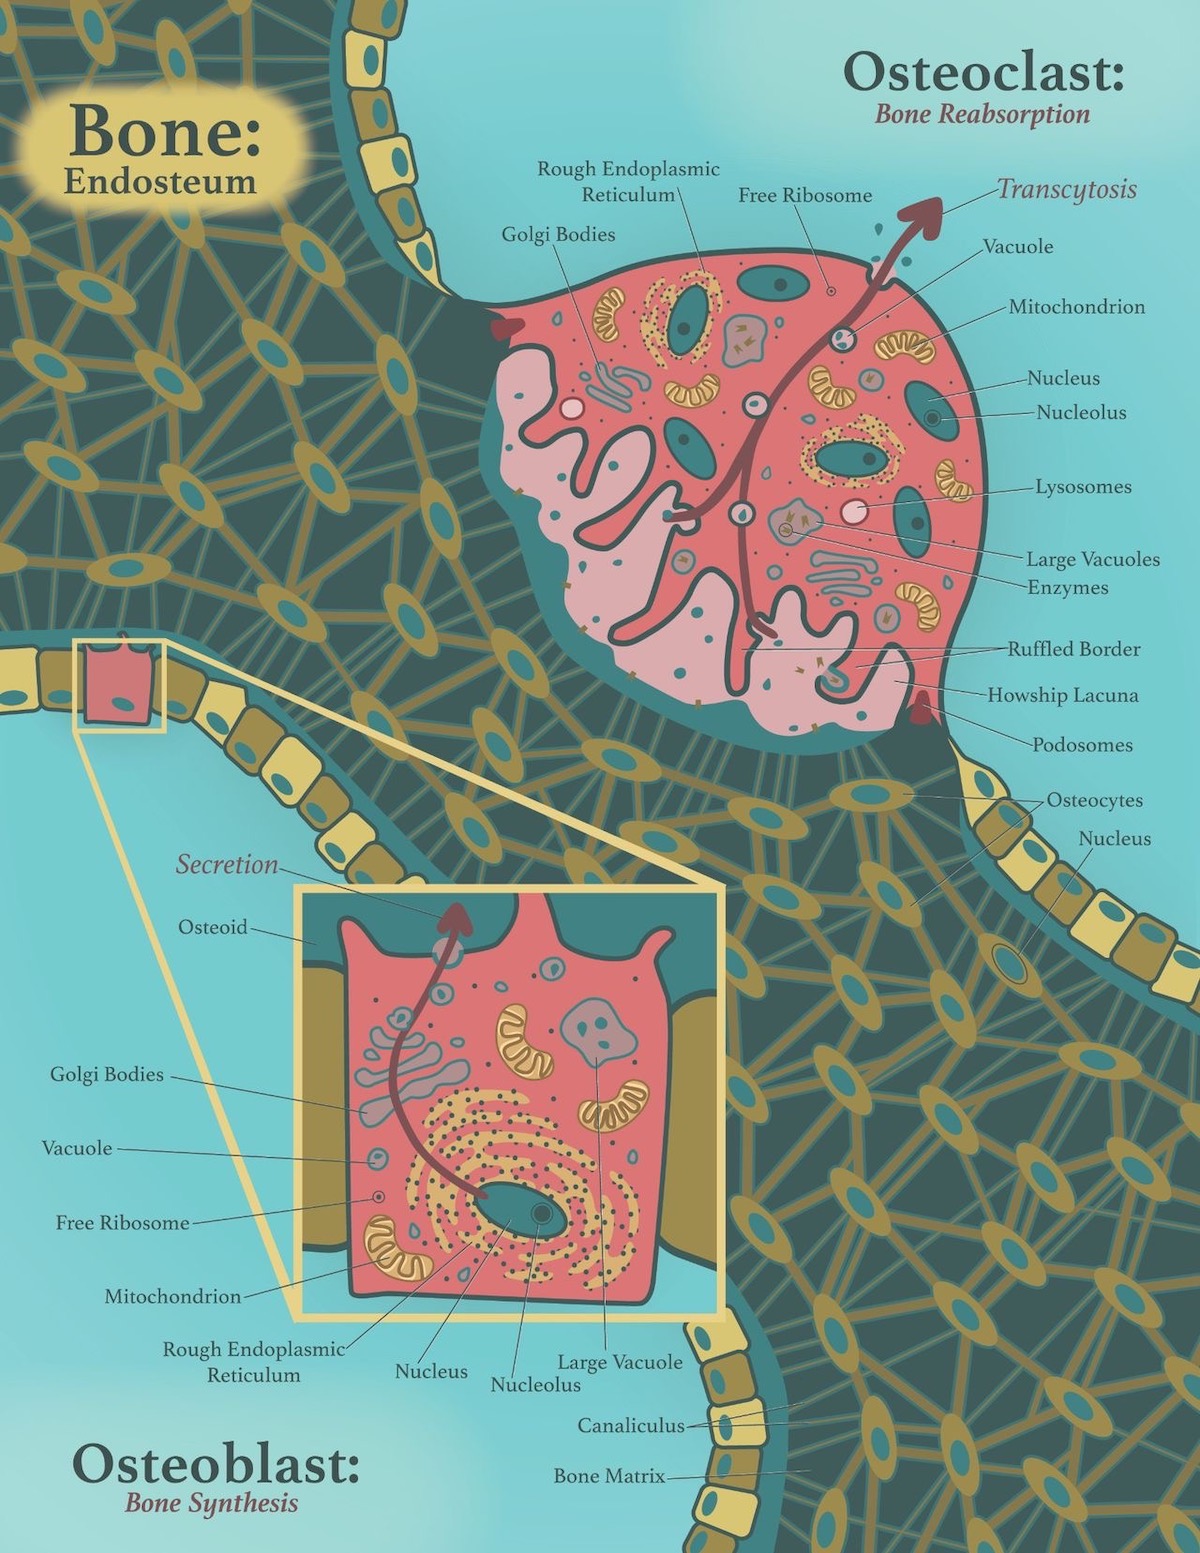 Osteoclas and Osteoblasts: Bone Reabsorption and Synthesis